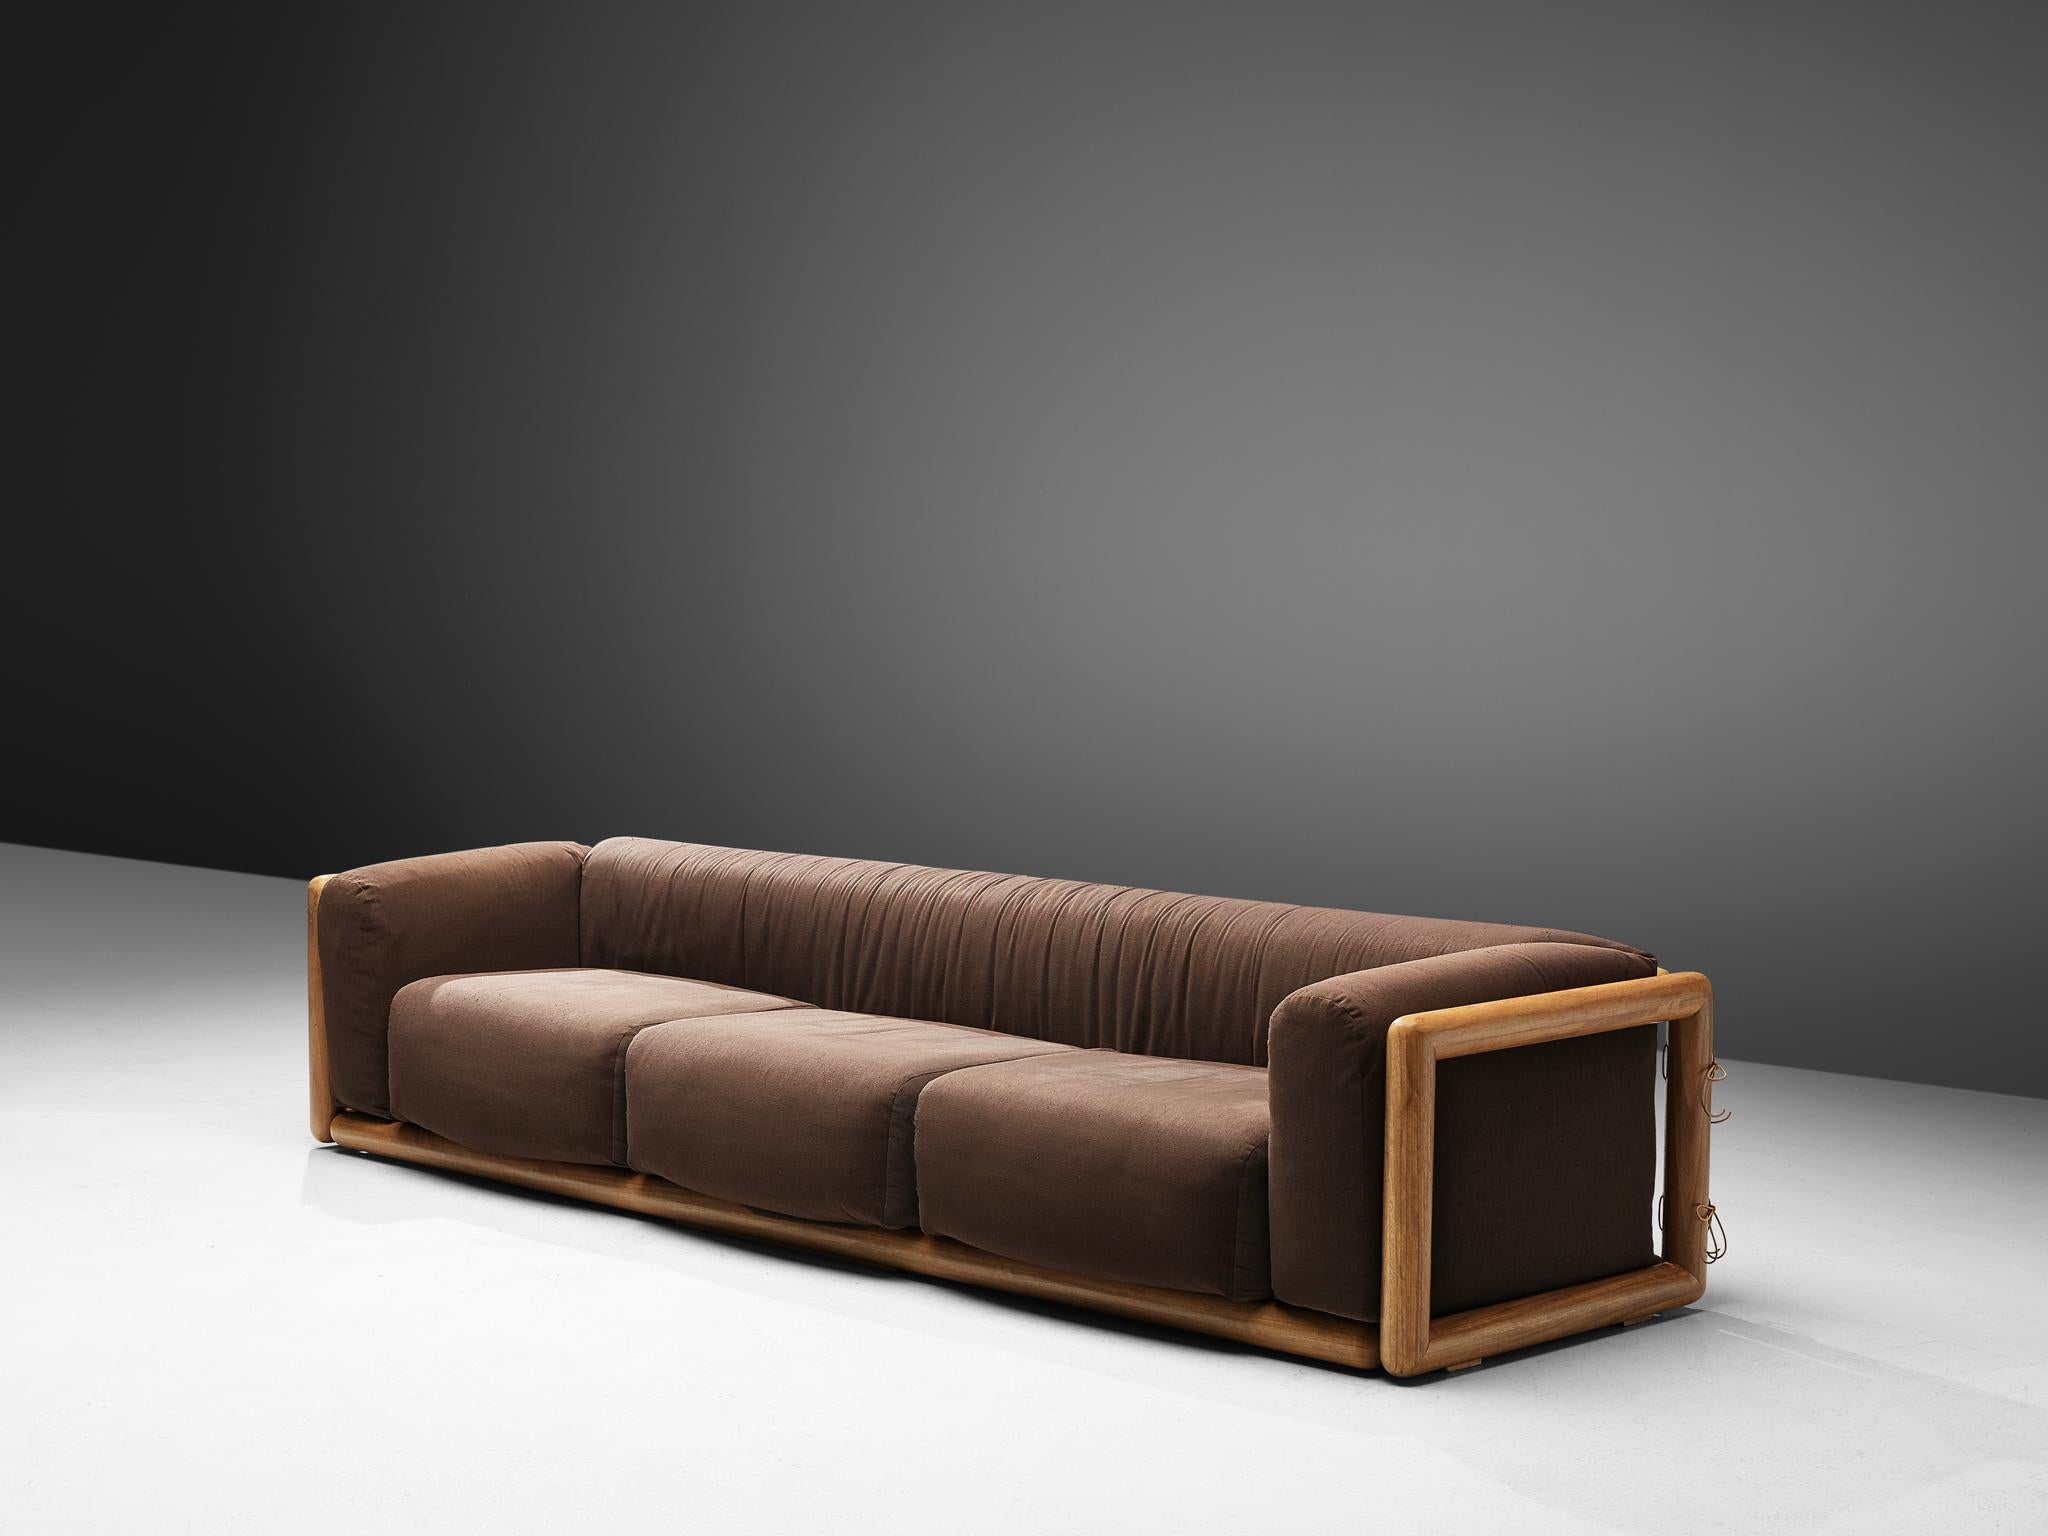 Carlo Scarpa for Simon, 'Cornaro' sofa, brown fabric, wood, Italy, 1973. 

The 'Cornaro' sofa by Carlo Scarpa is a perfect example of the Ultrarazionale style; breaking away from the strict limits of Rationalism, resulting in a sofa with a solid